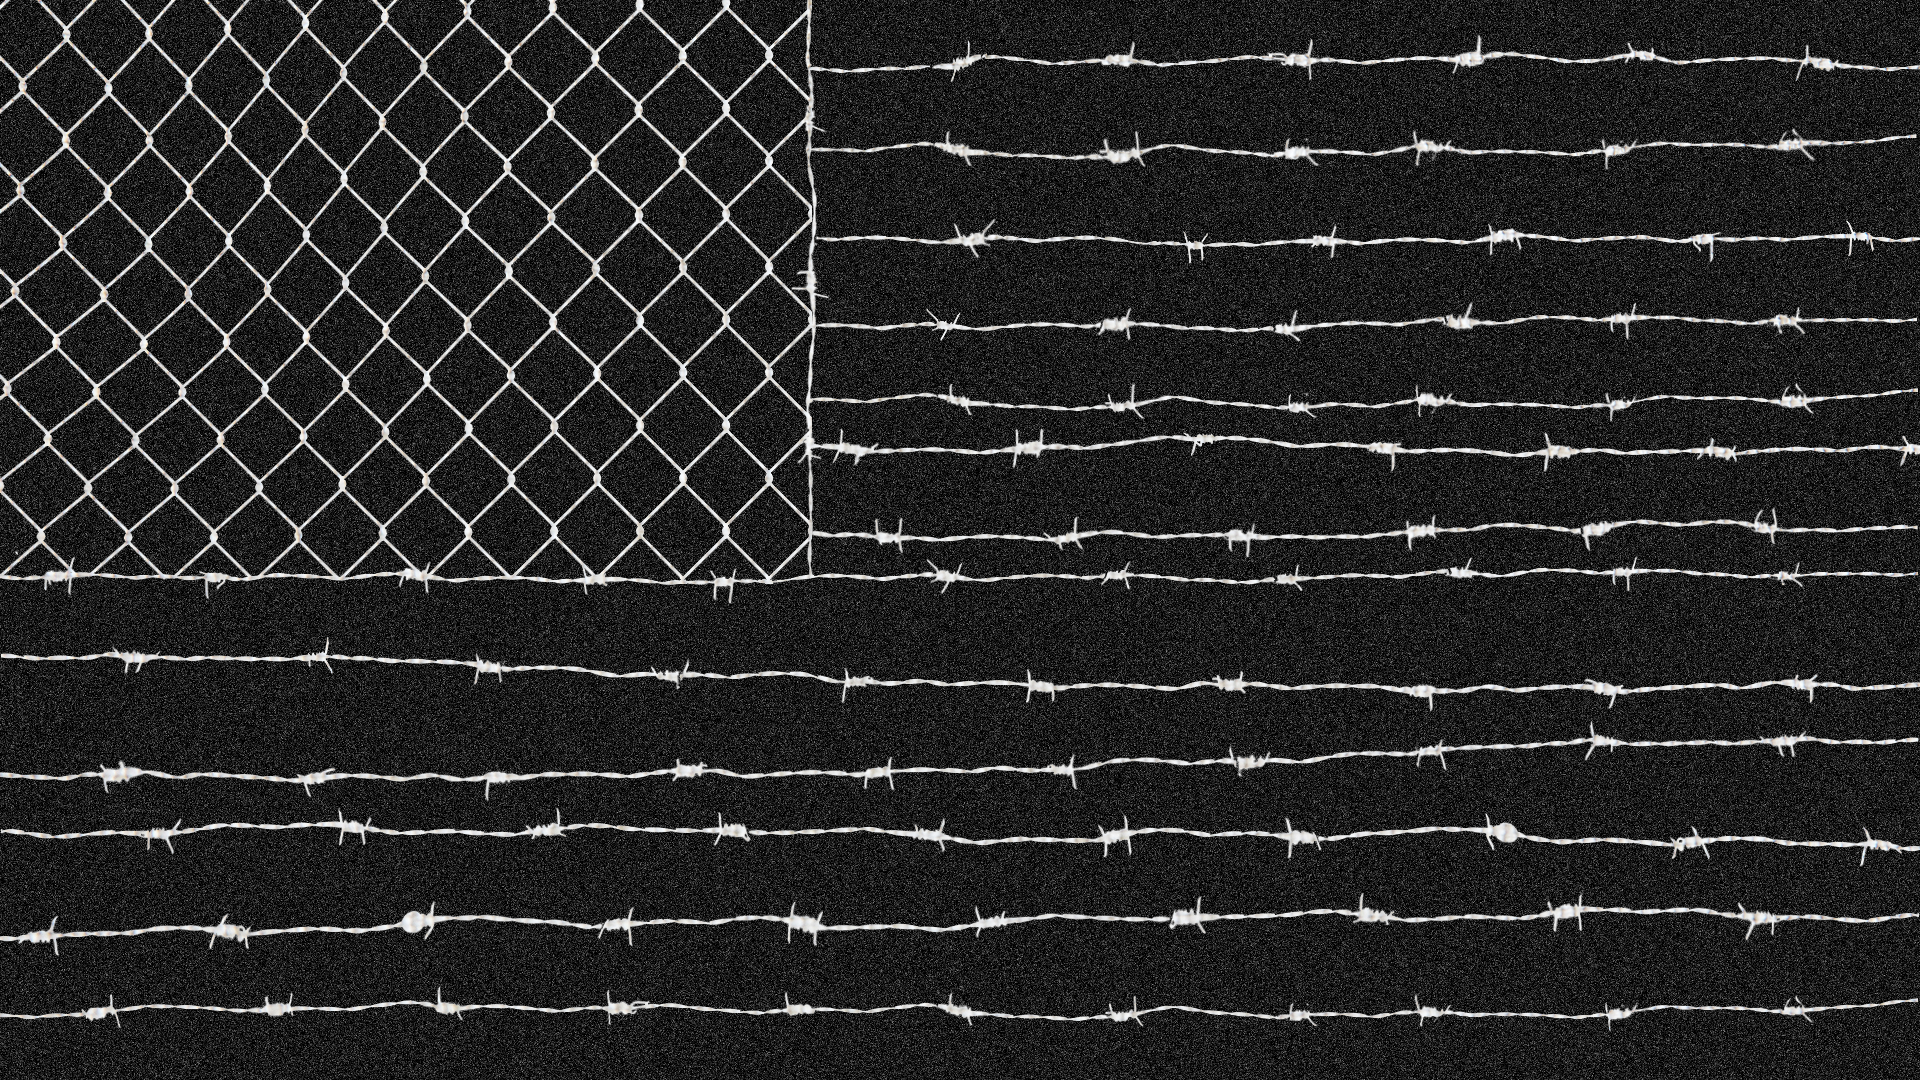 Illustration of an American flag with a chain link fence in the stars area, and barbed wire making up the stripes. 